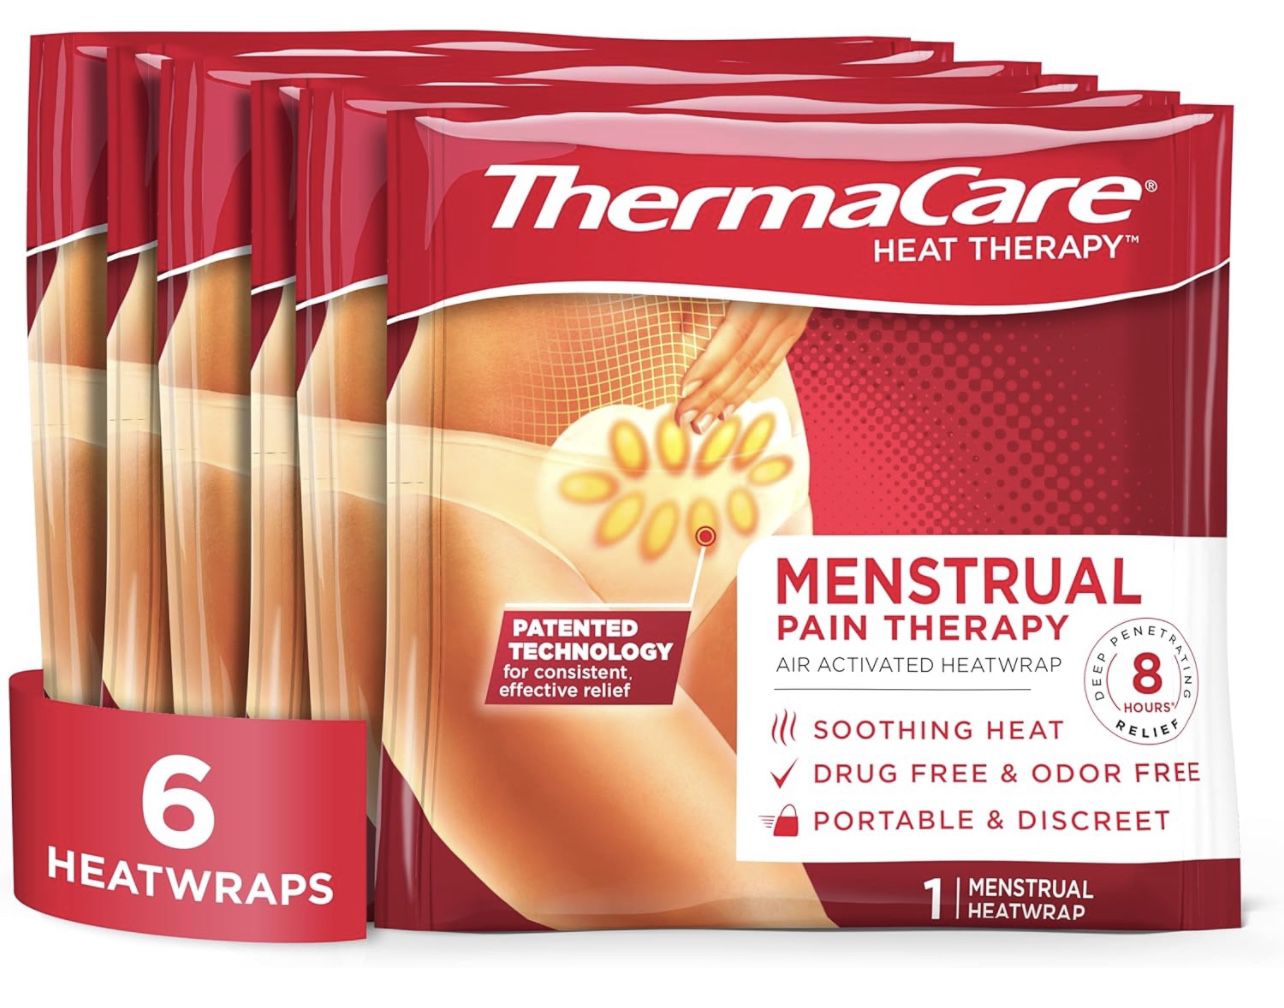 ThermaCare Portable Menstrual Heating Pad, Period Paid Relief Heat Patches for Cramps (6 Count)